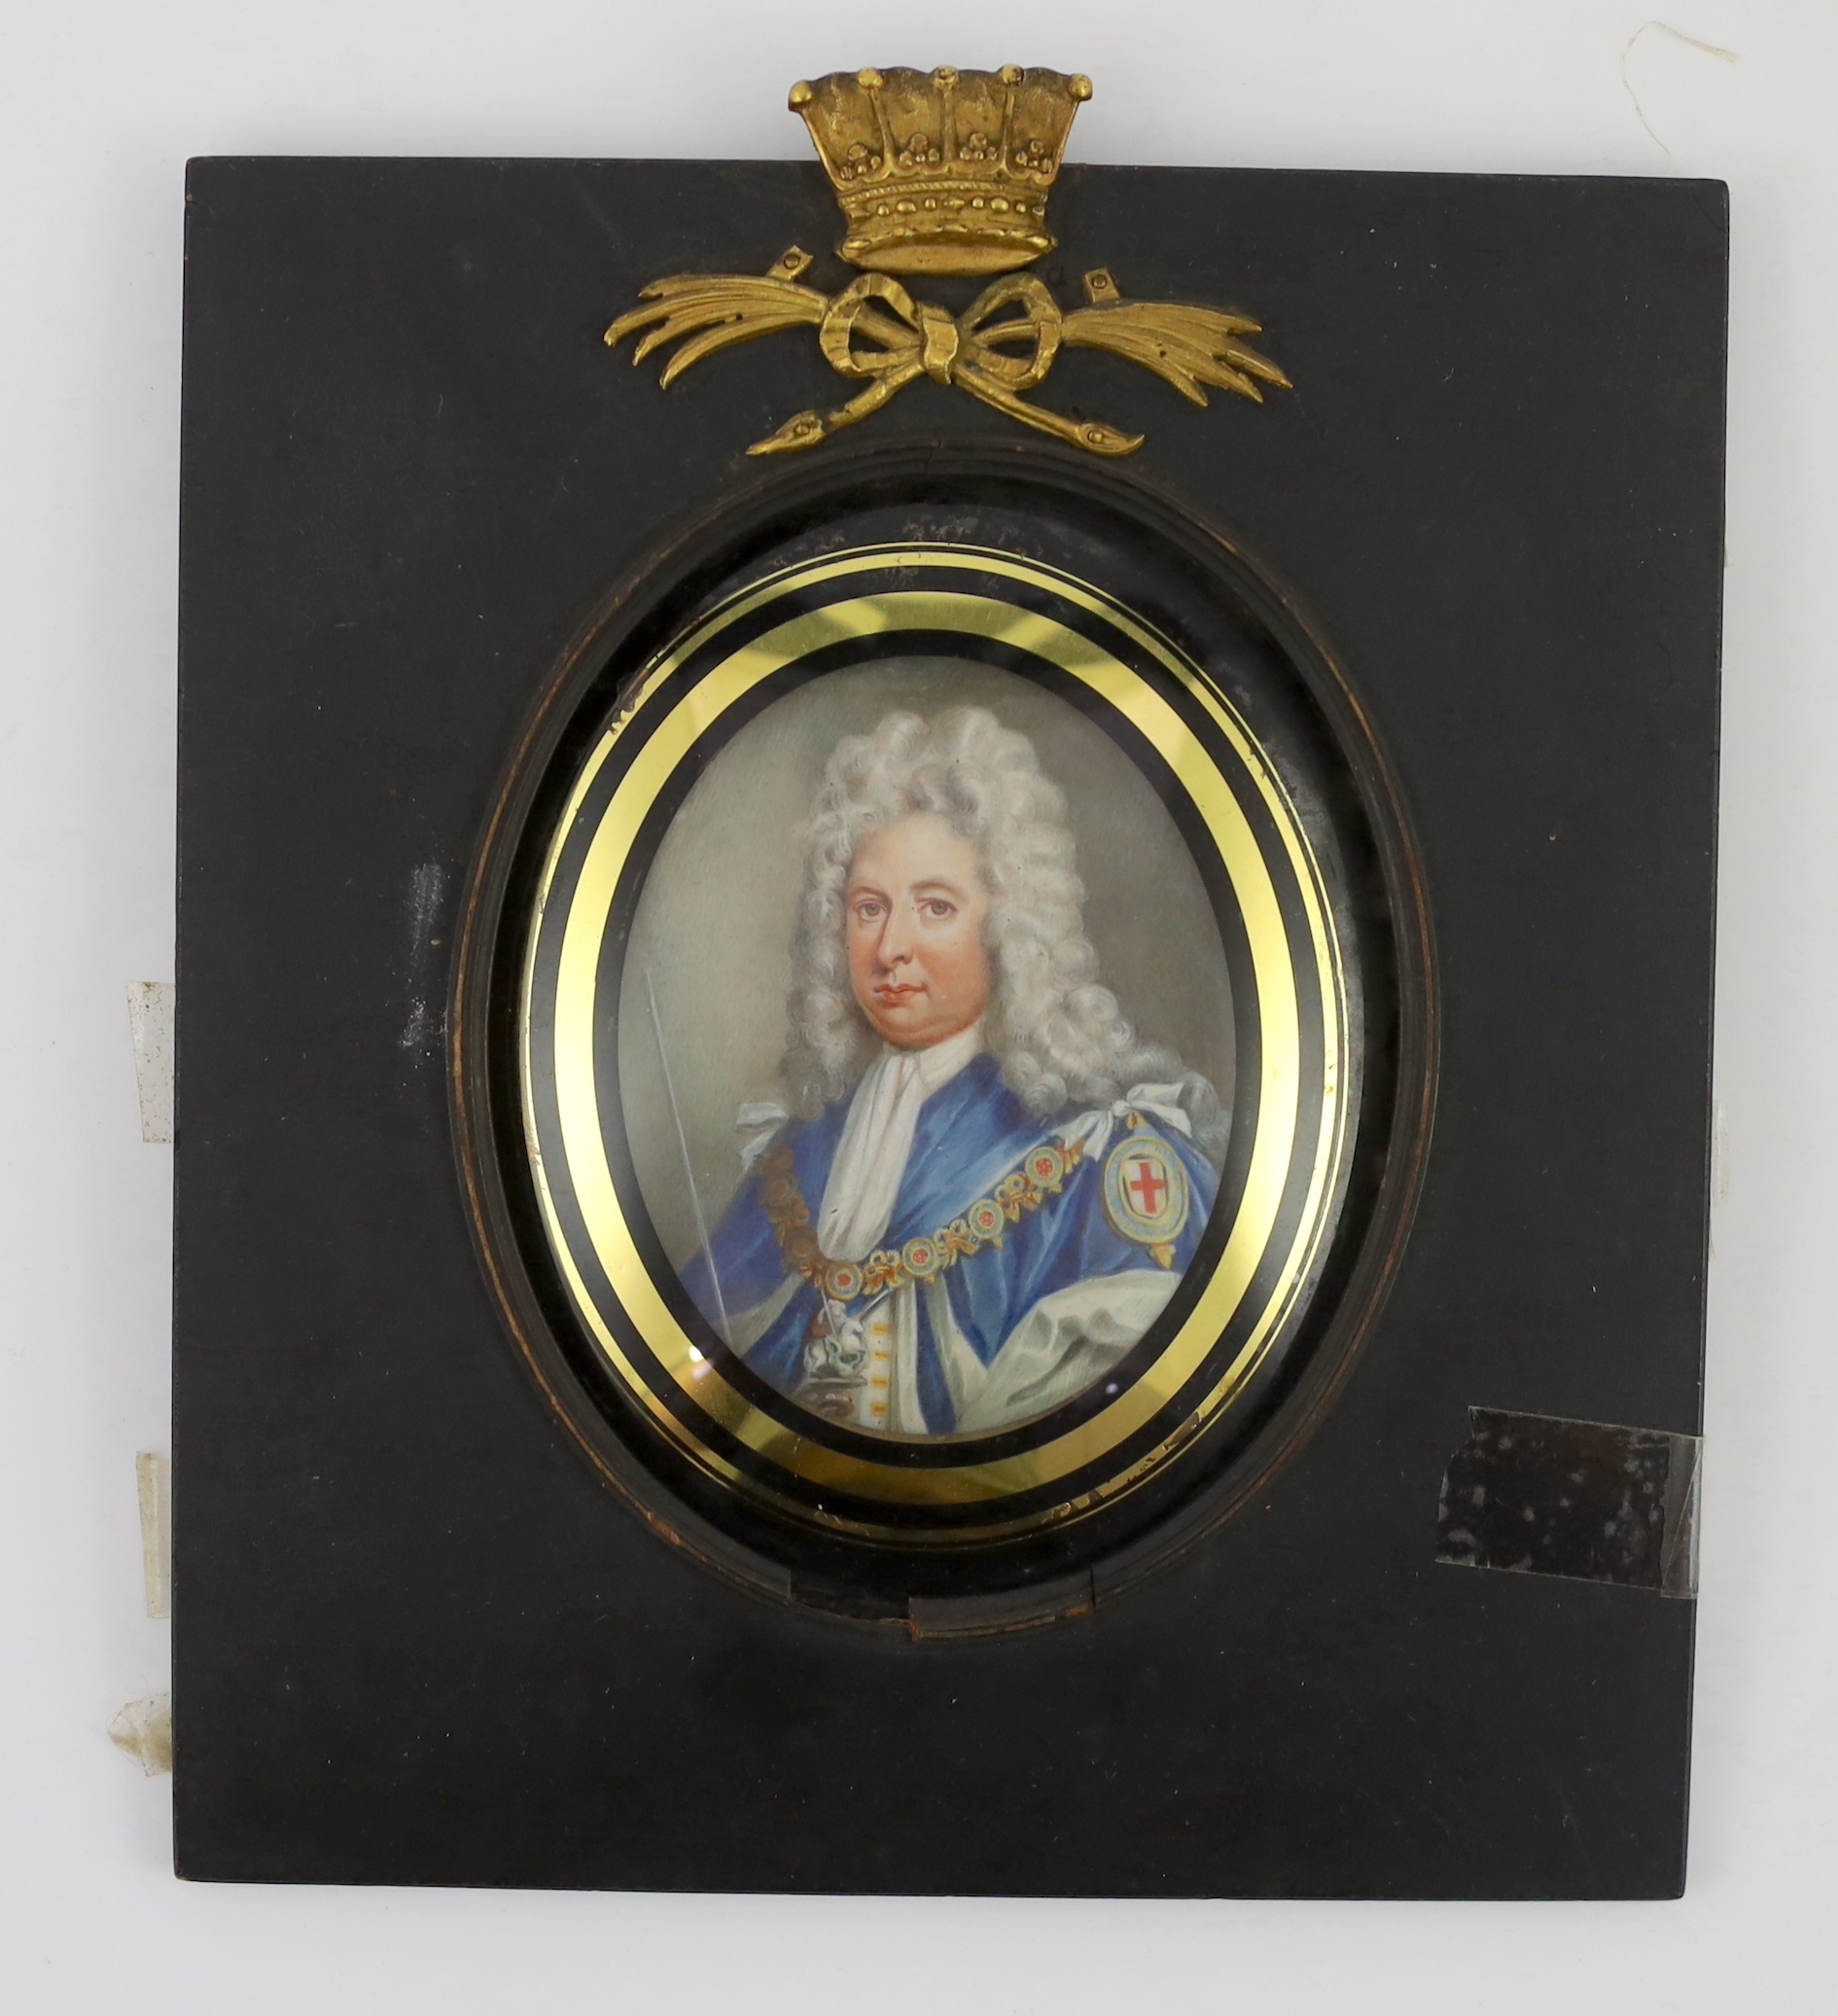 18th century English School , Miniature portrait of Robert Harley, 1st Earl of Oxford and Earl Mortimer, watercolour on ivory, 9 x 7cm. Ivory submission reference: ZMKRQS46